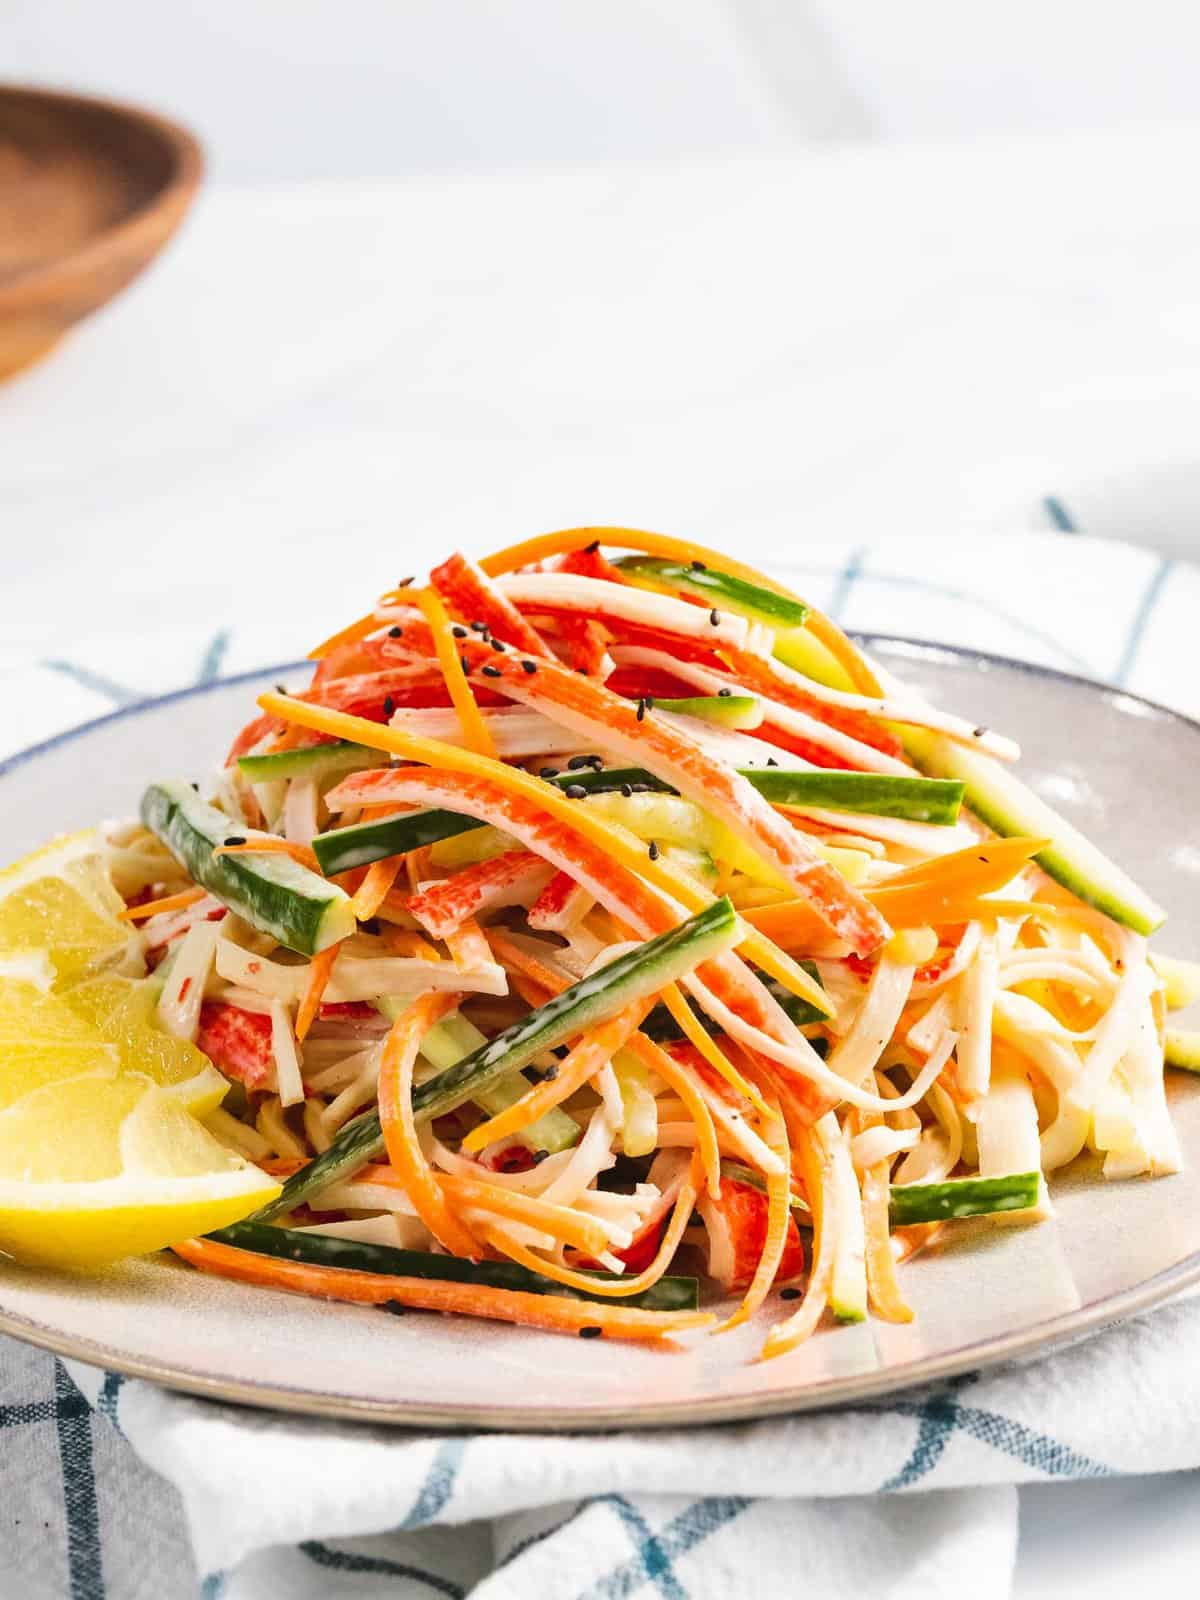 Kani salad made with crab stick, carrots, and cucumbers dressed in a mayo dressing.